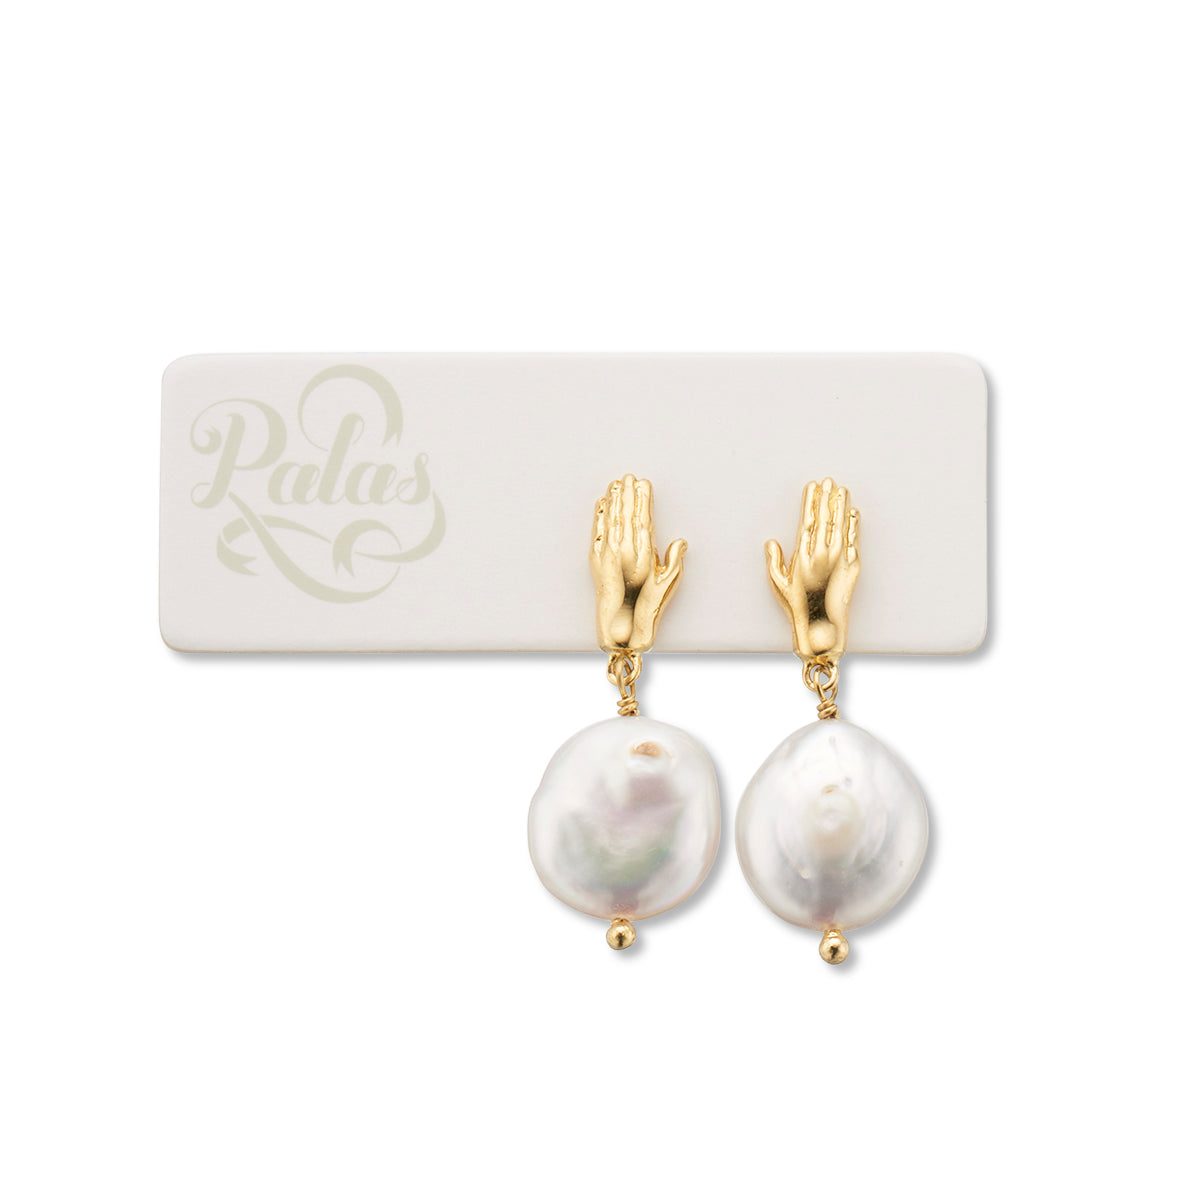 Aristotle hand and pearl earrings